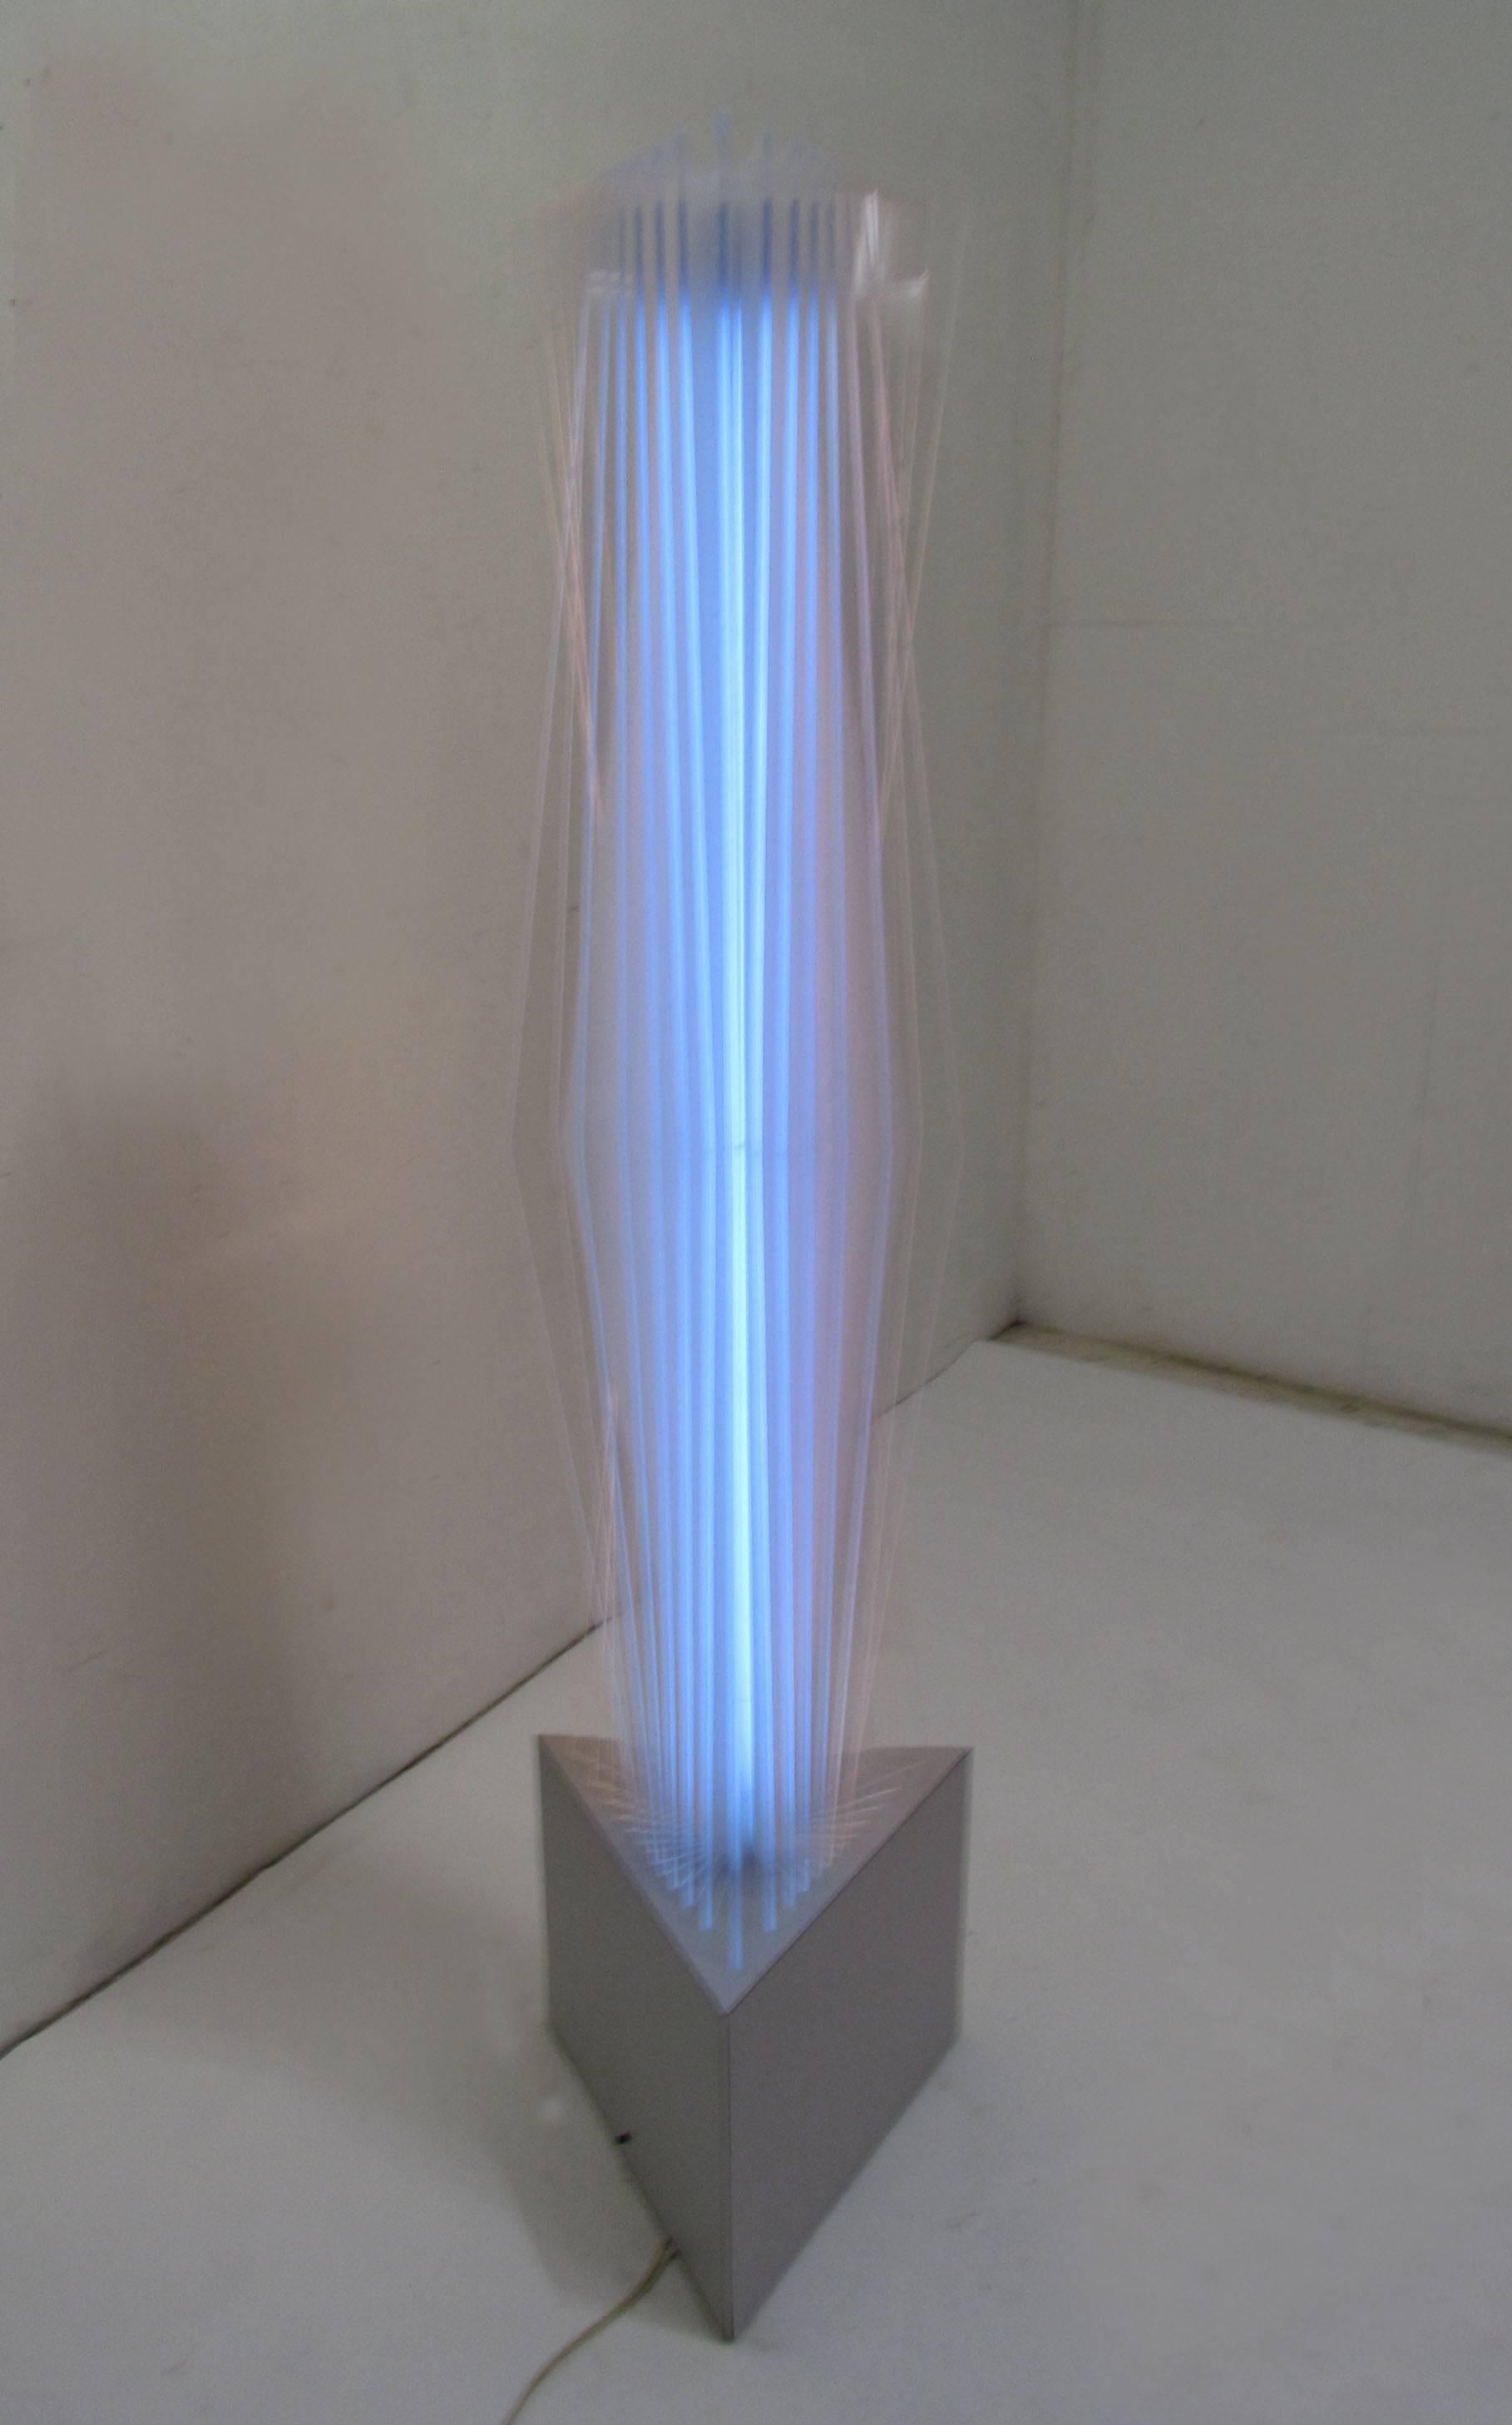 From the Long Island estate of the noted New York sculptor Norman Mercer, a neon light sculpture consisting of panels of clear Lexan radiating from interior tubes of blue and pink mounted on a triangular base, circa 1980s, this piece once decorated